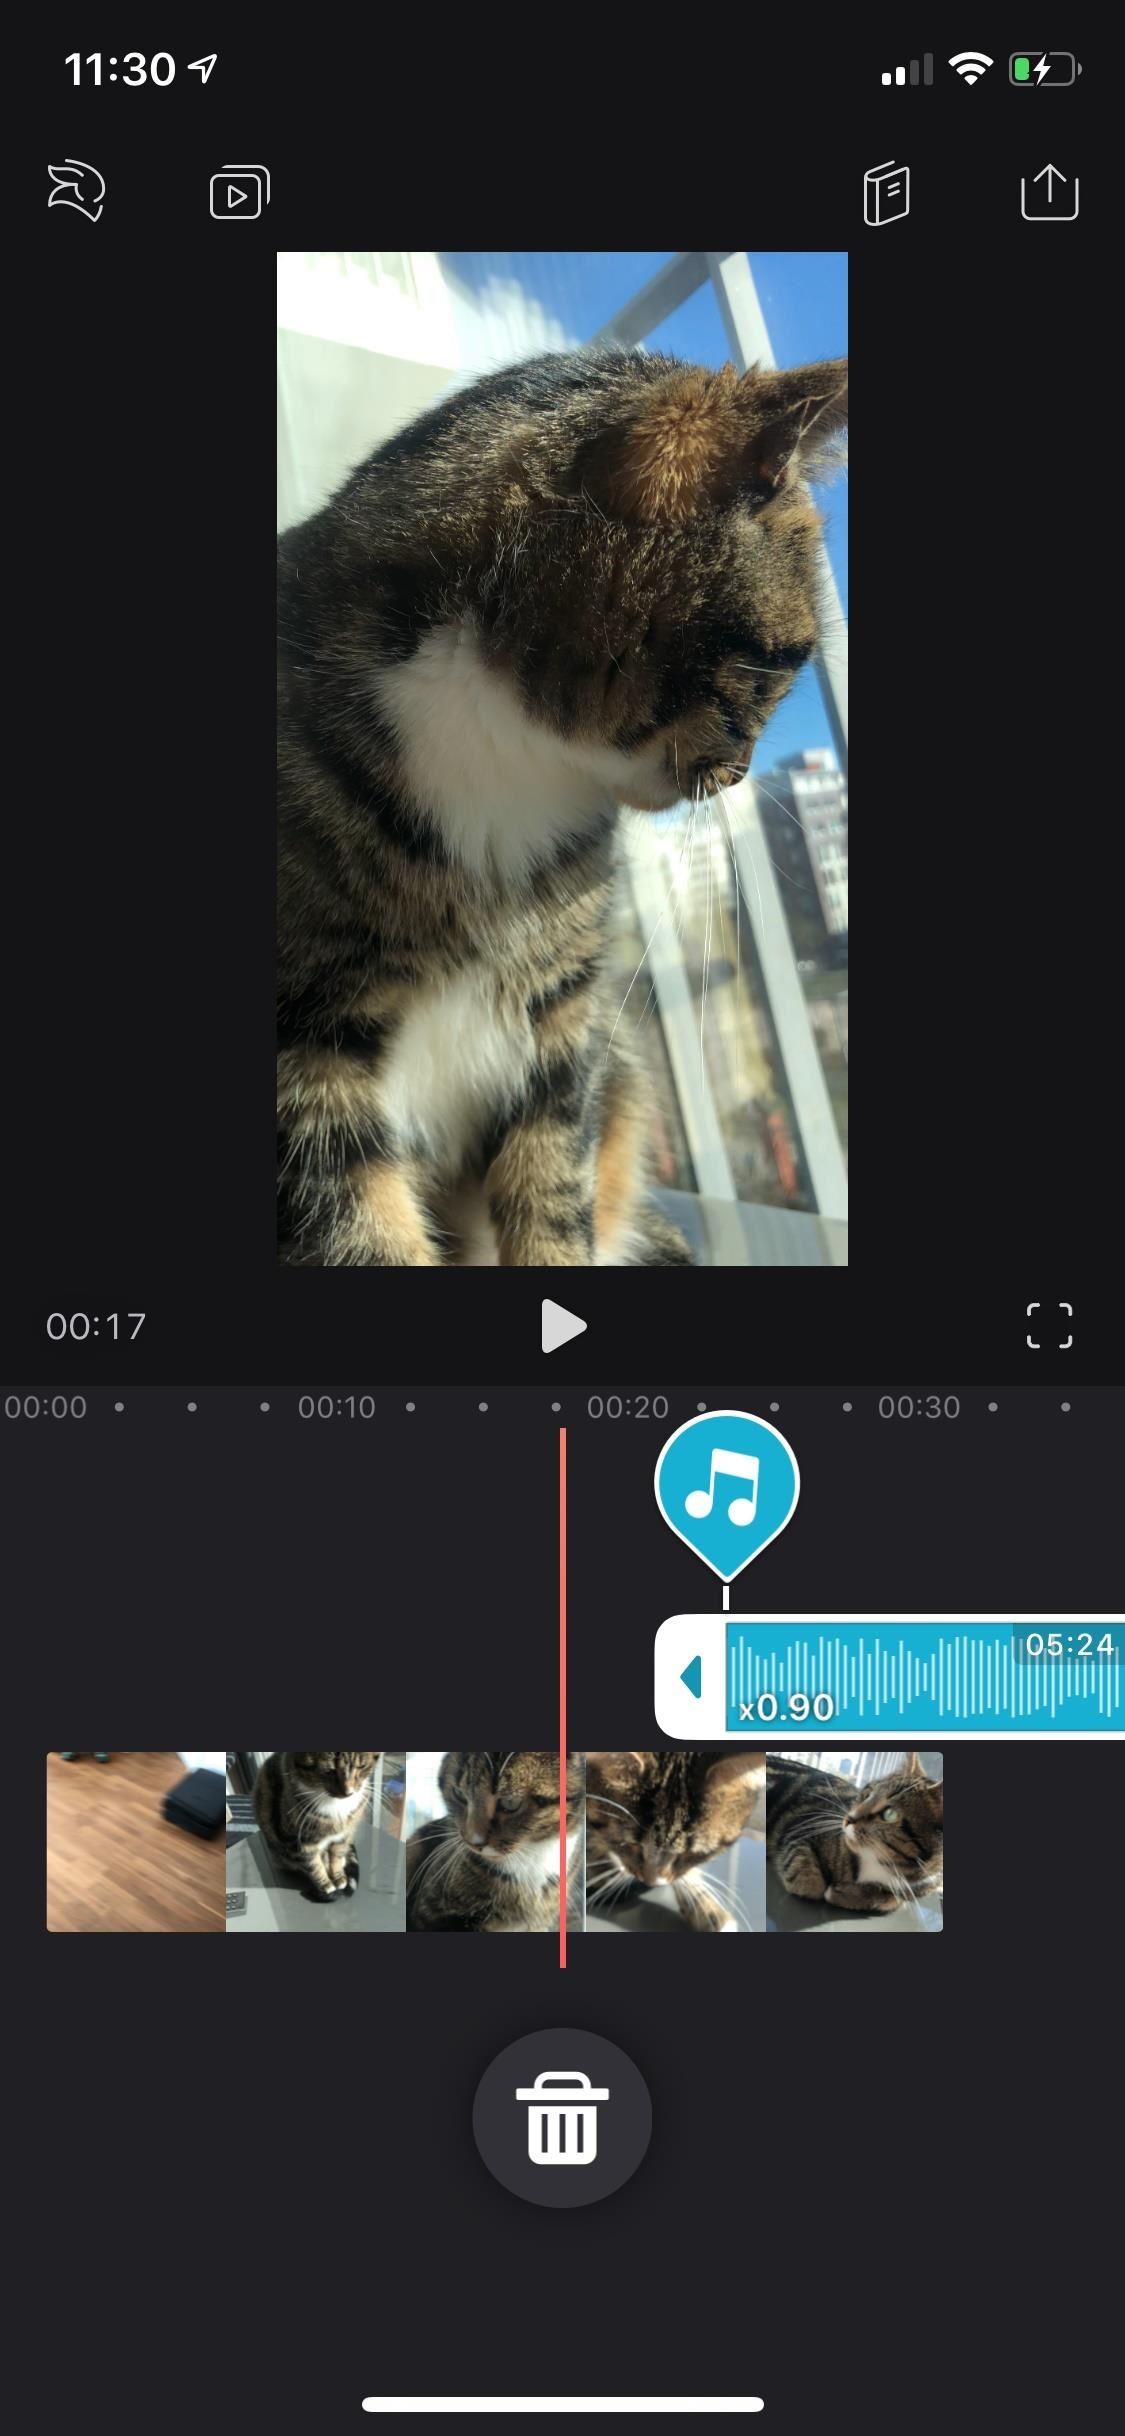 Everything You Need to Know About Adding & Editing Audio for Videos in Enlight Videoleap for iPhone